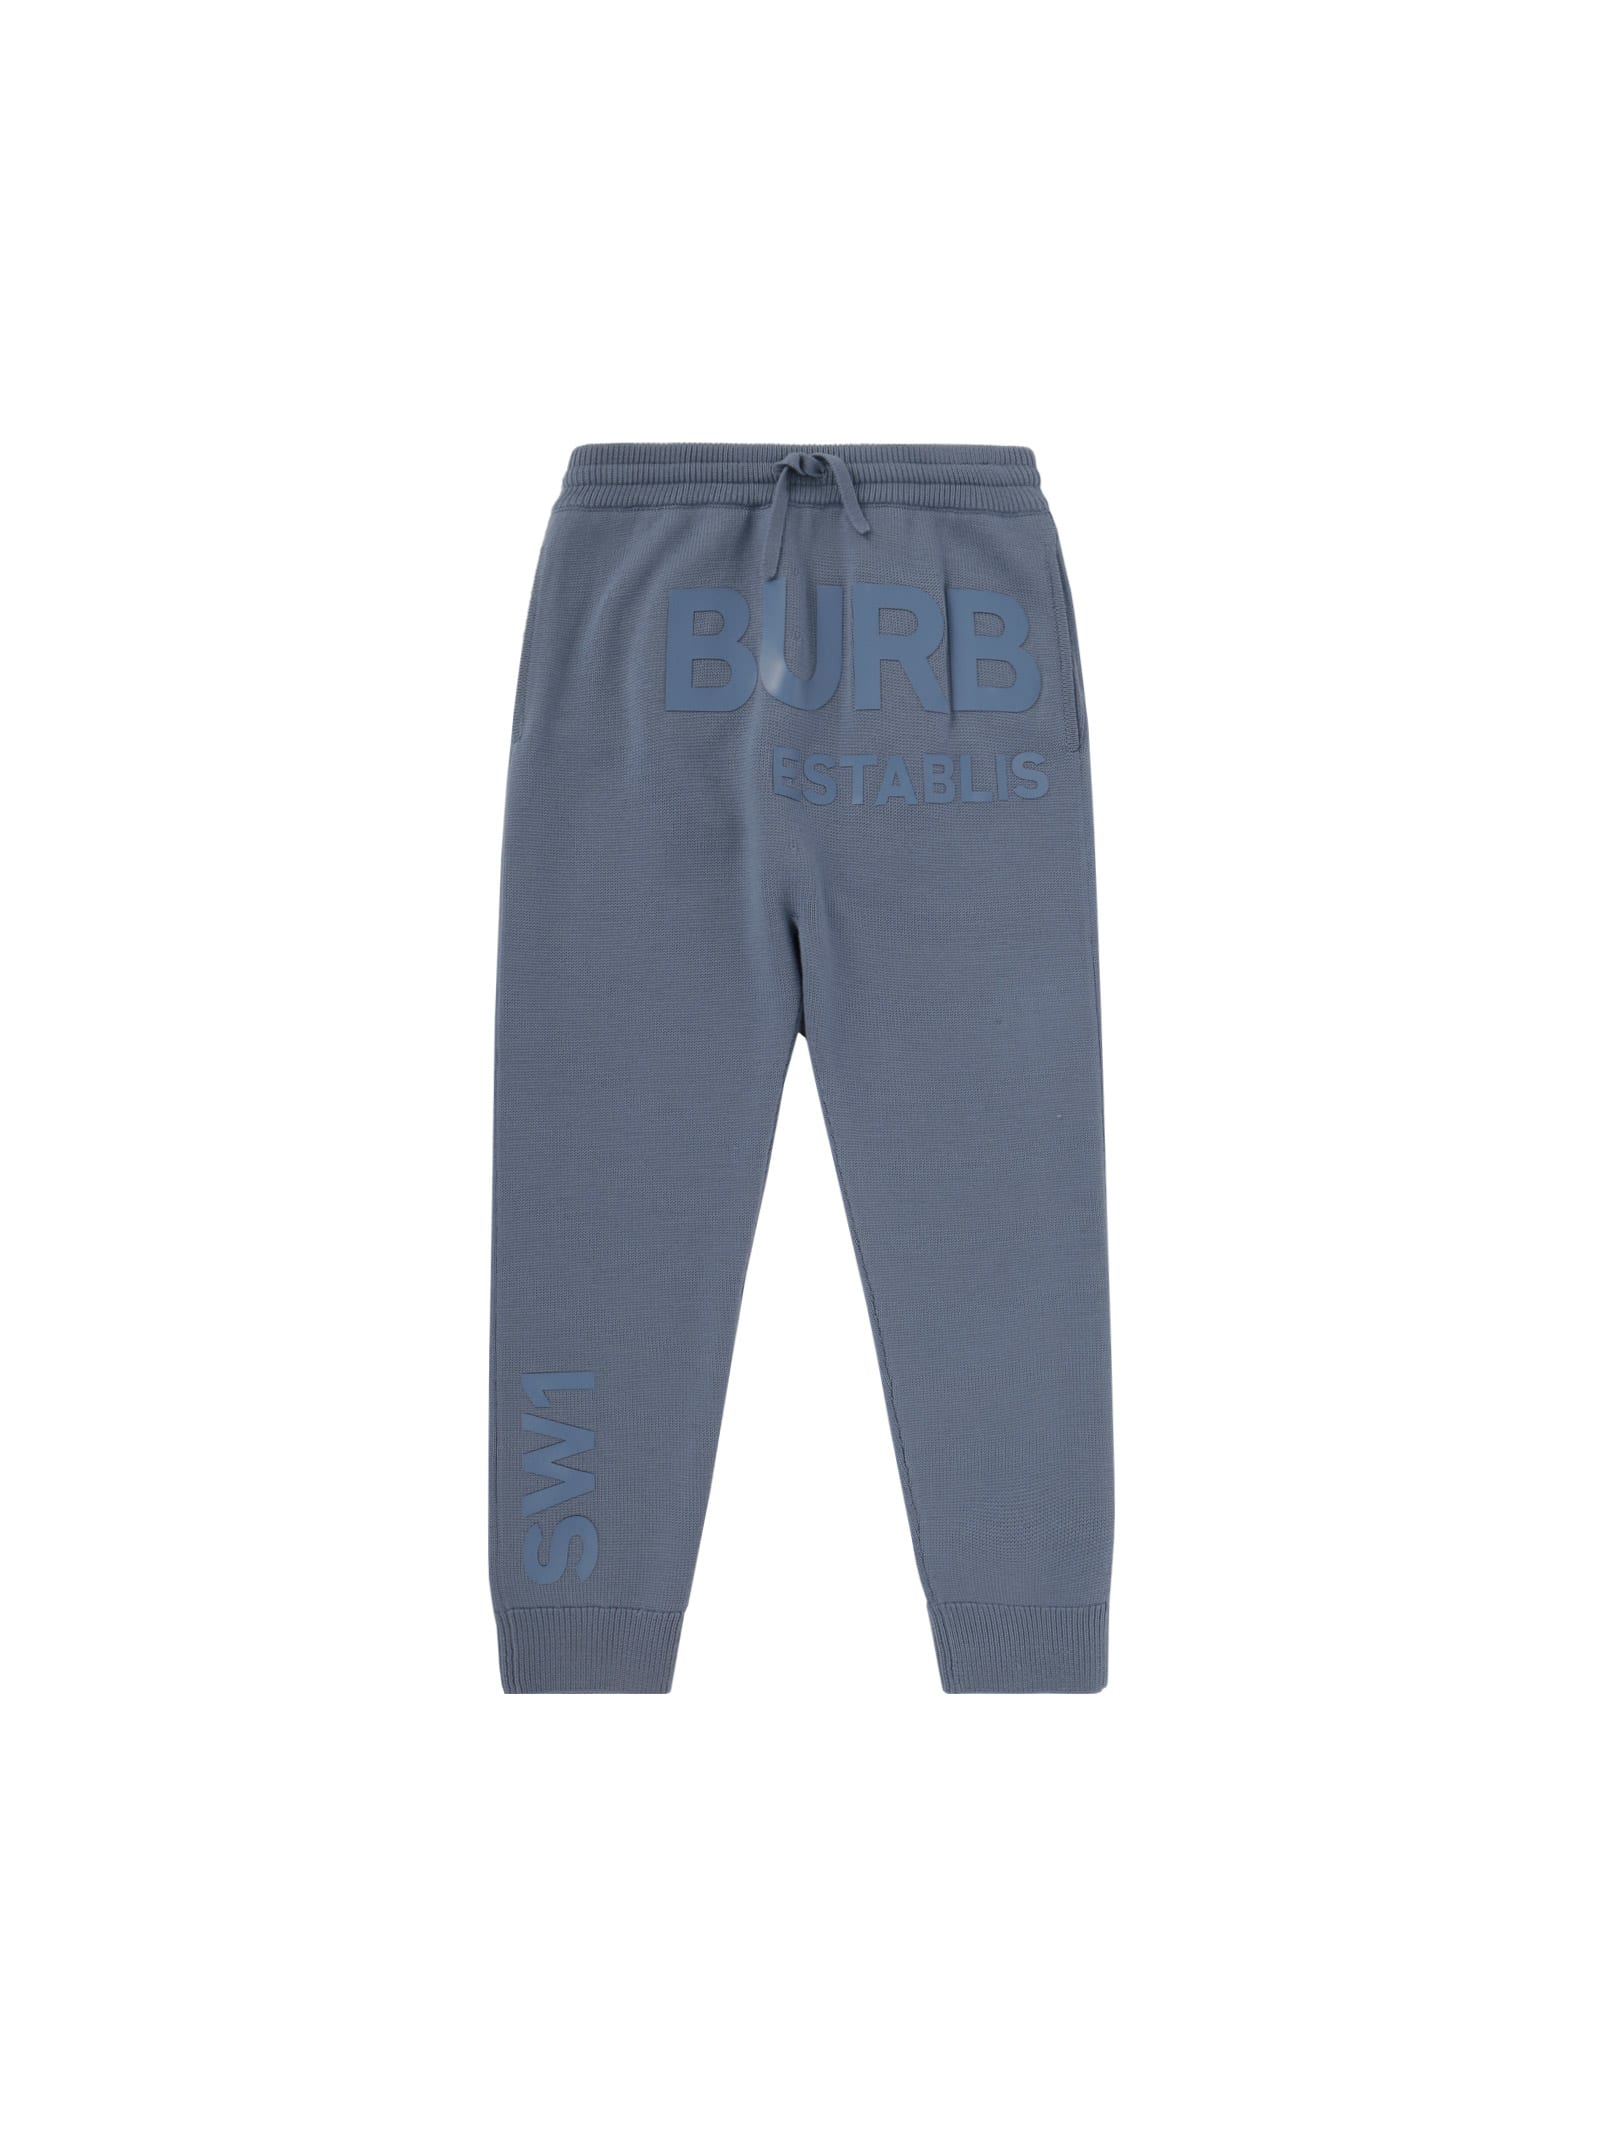 Burberry Clarise Pants For Boys